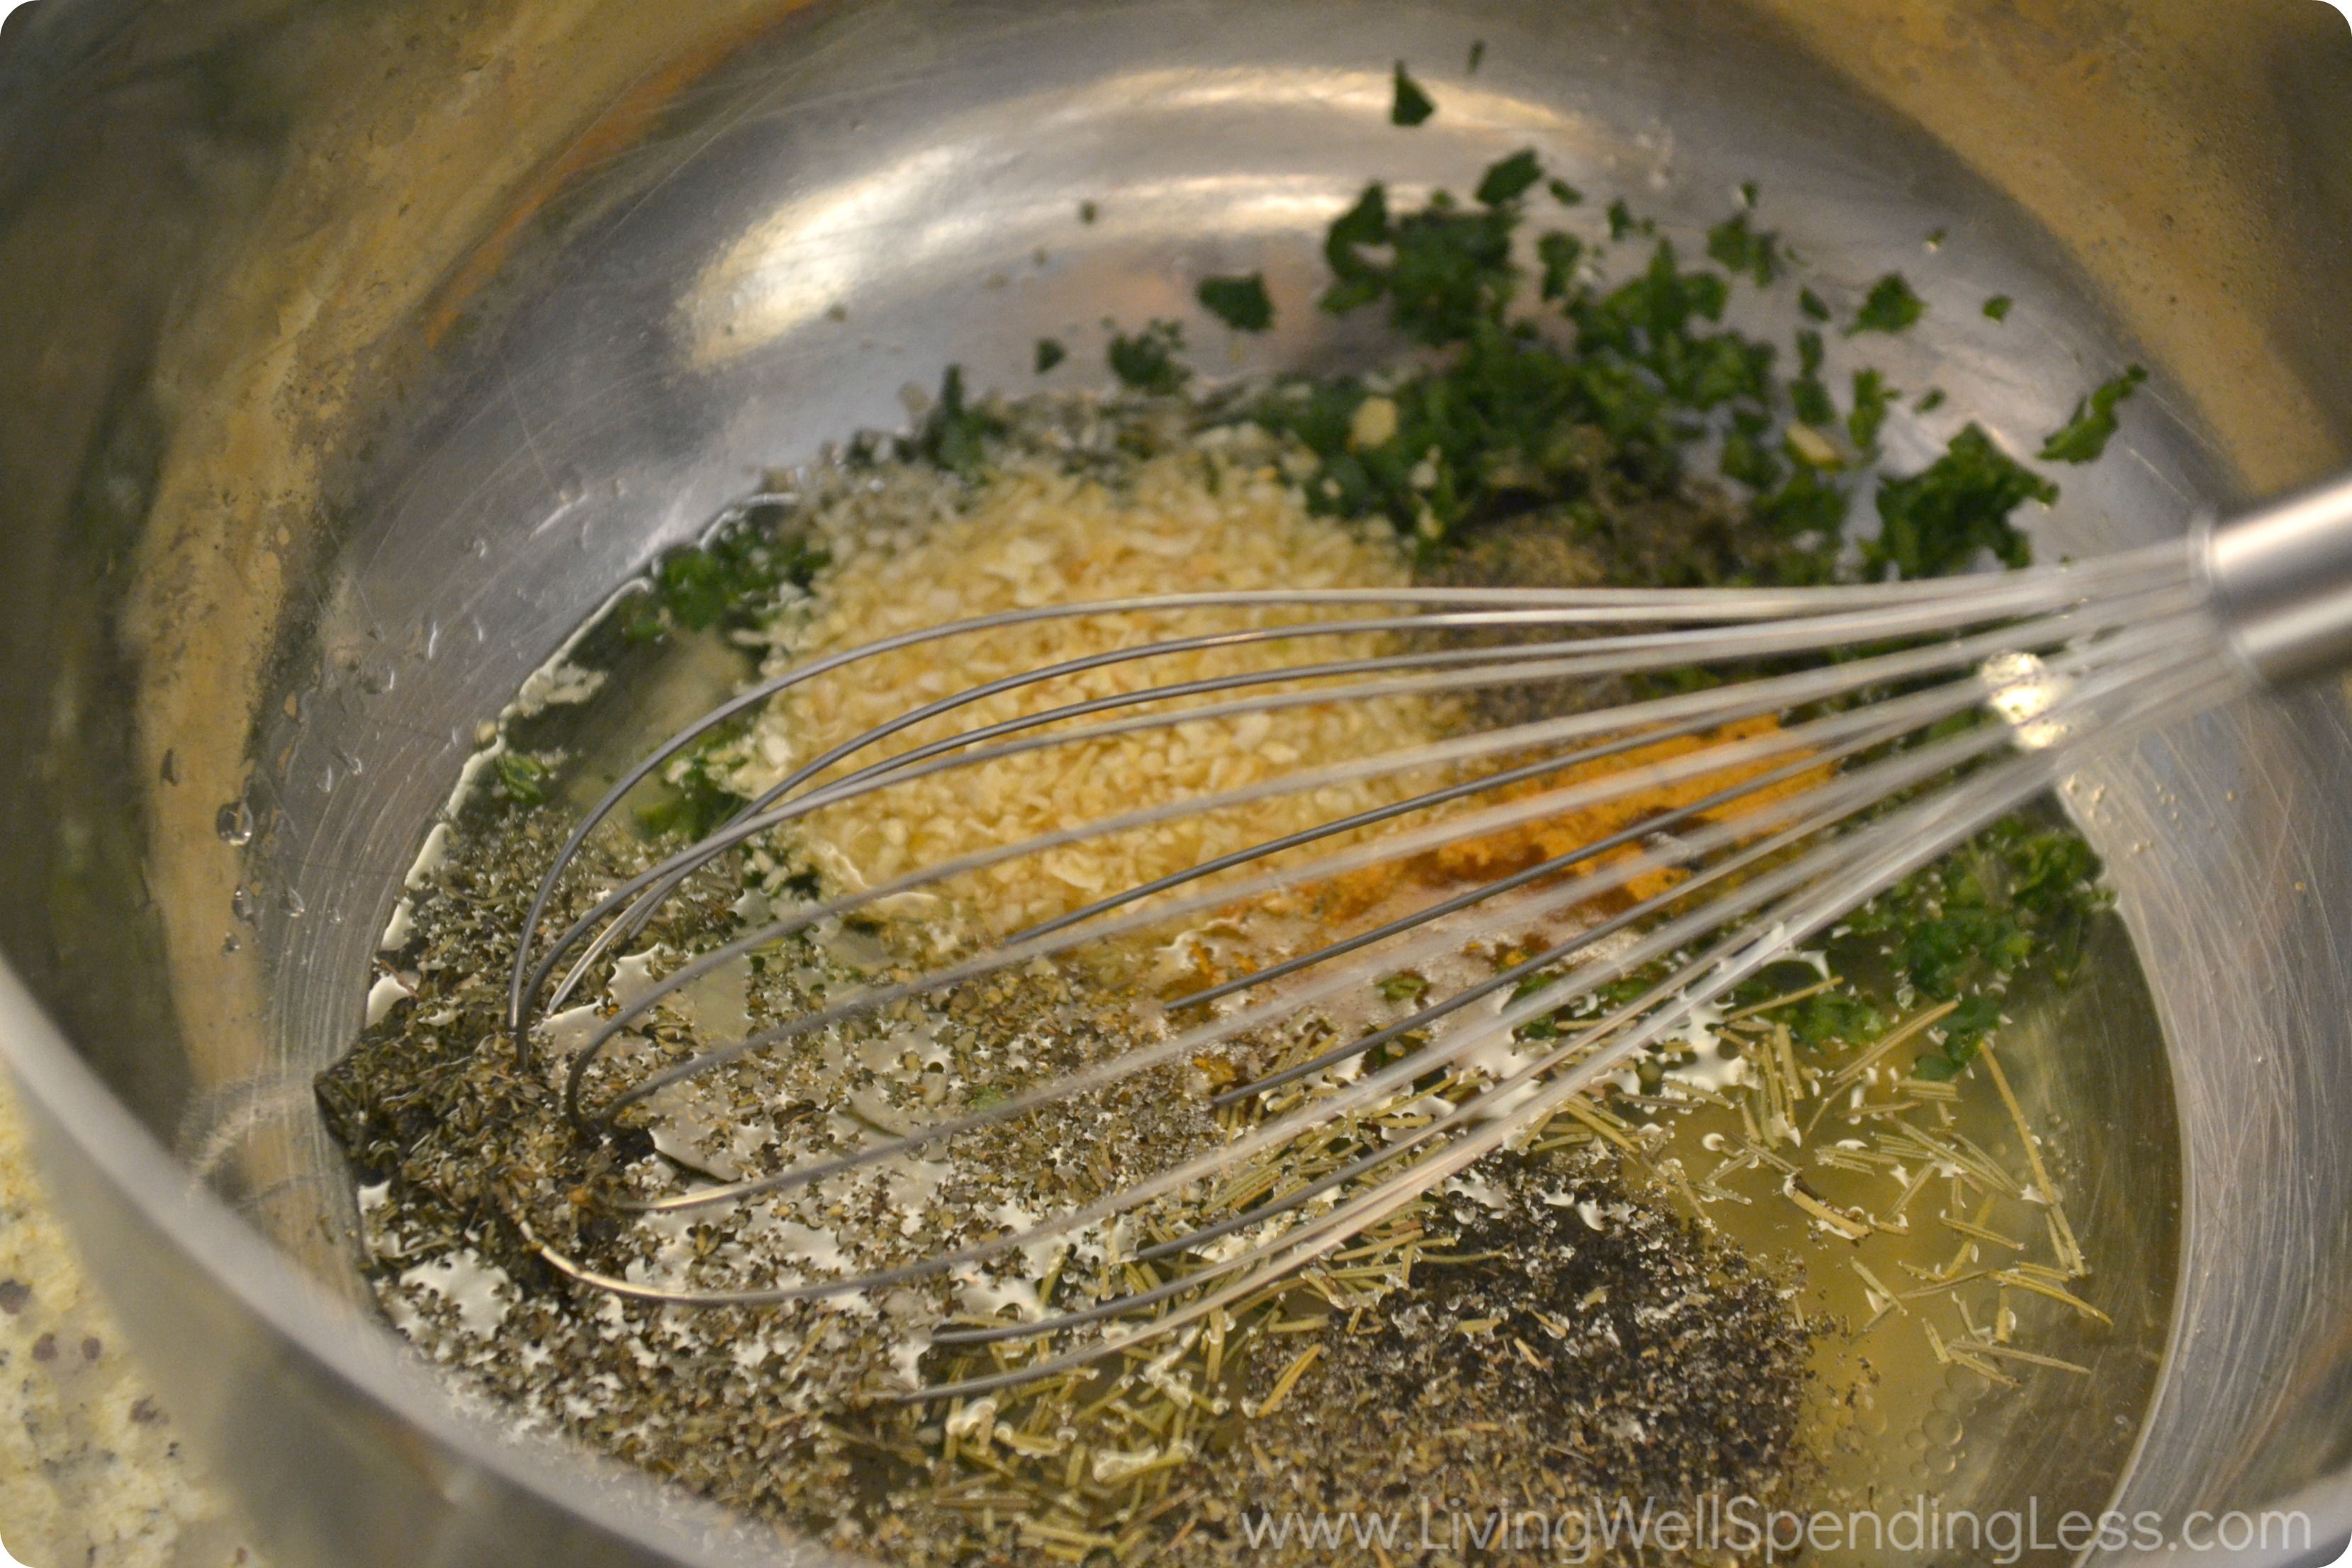 Compose the sauce by whisking together herbs, garlic, olive oil and seasonings in a bowl. 